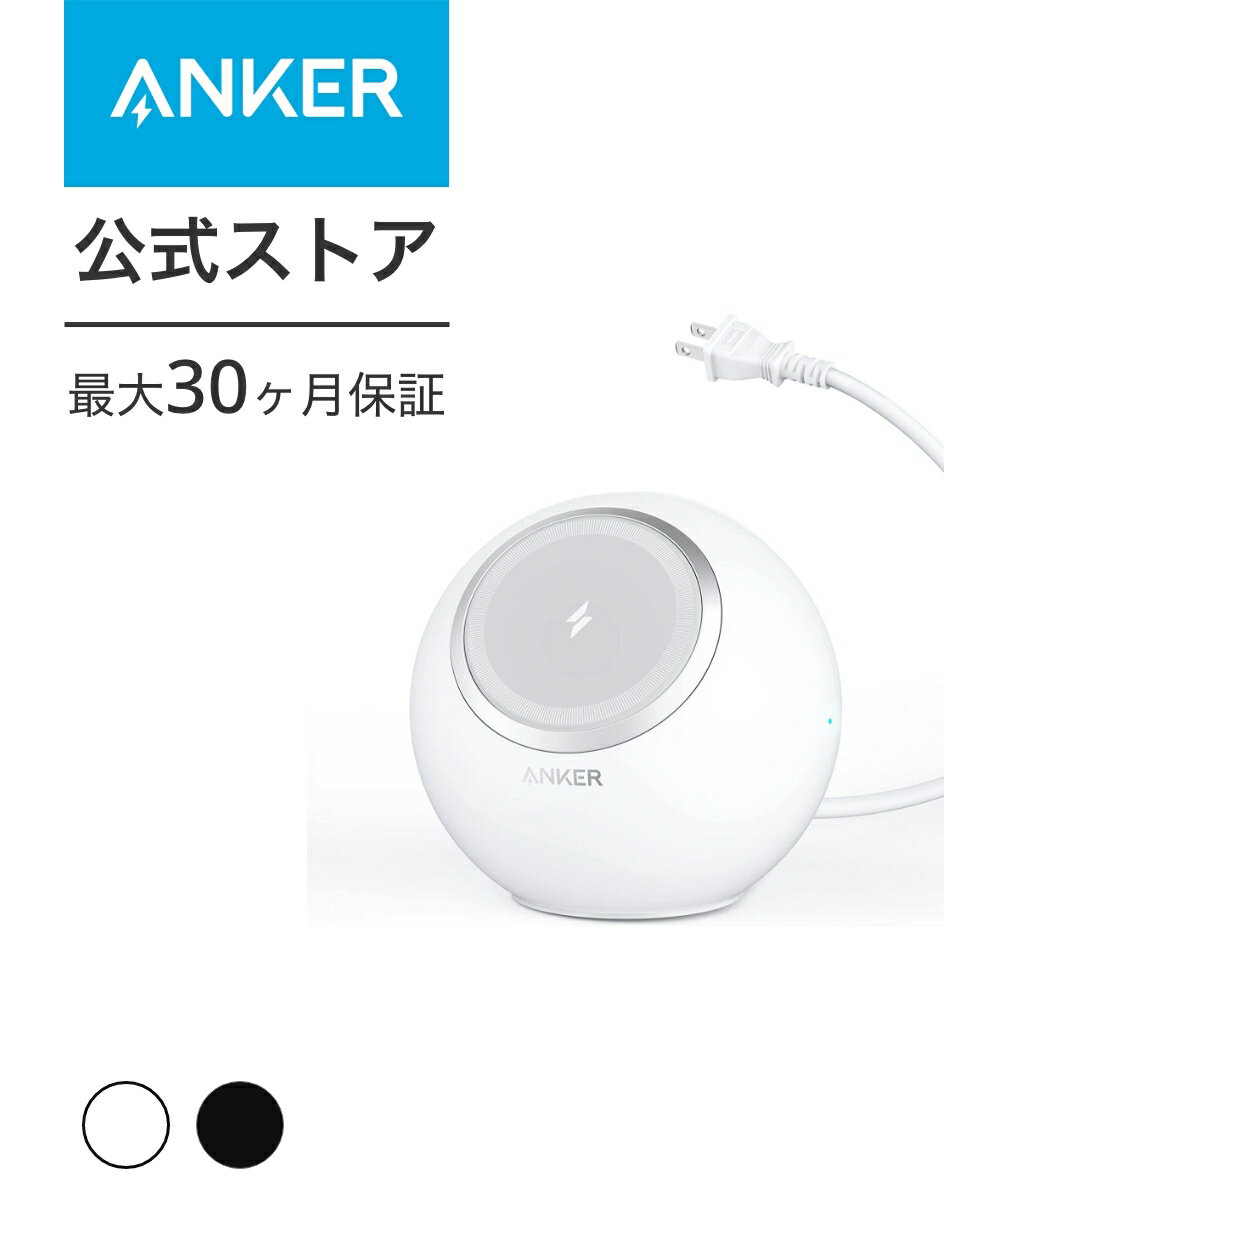 Anker 637 Magnetic Charging Station (MagGo) (マグネット式 8-in-1 ワイヤレス充電ステーション)iPhone